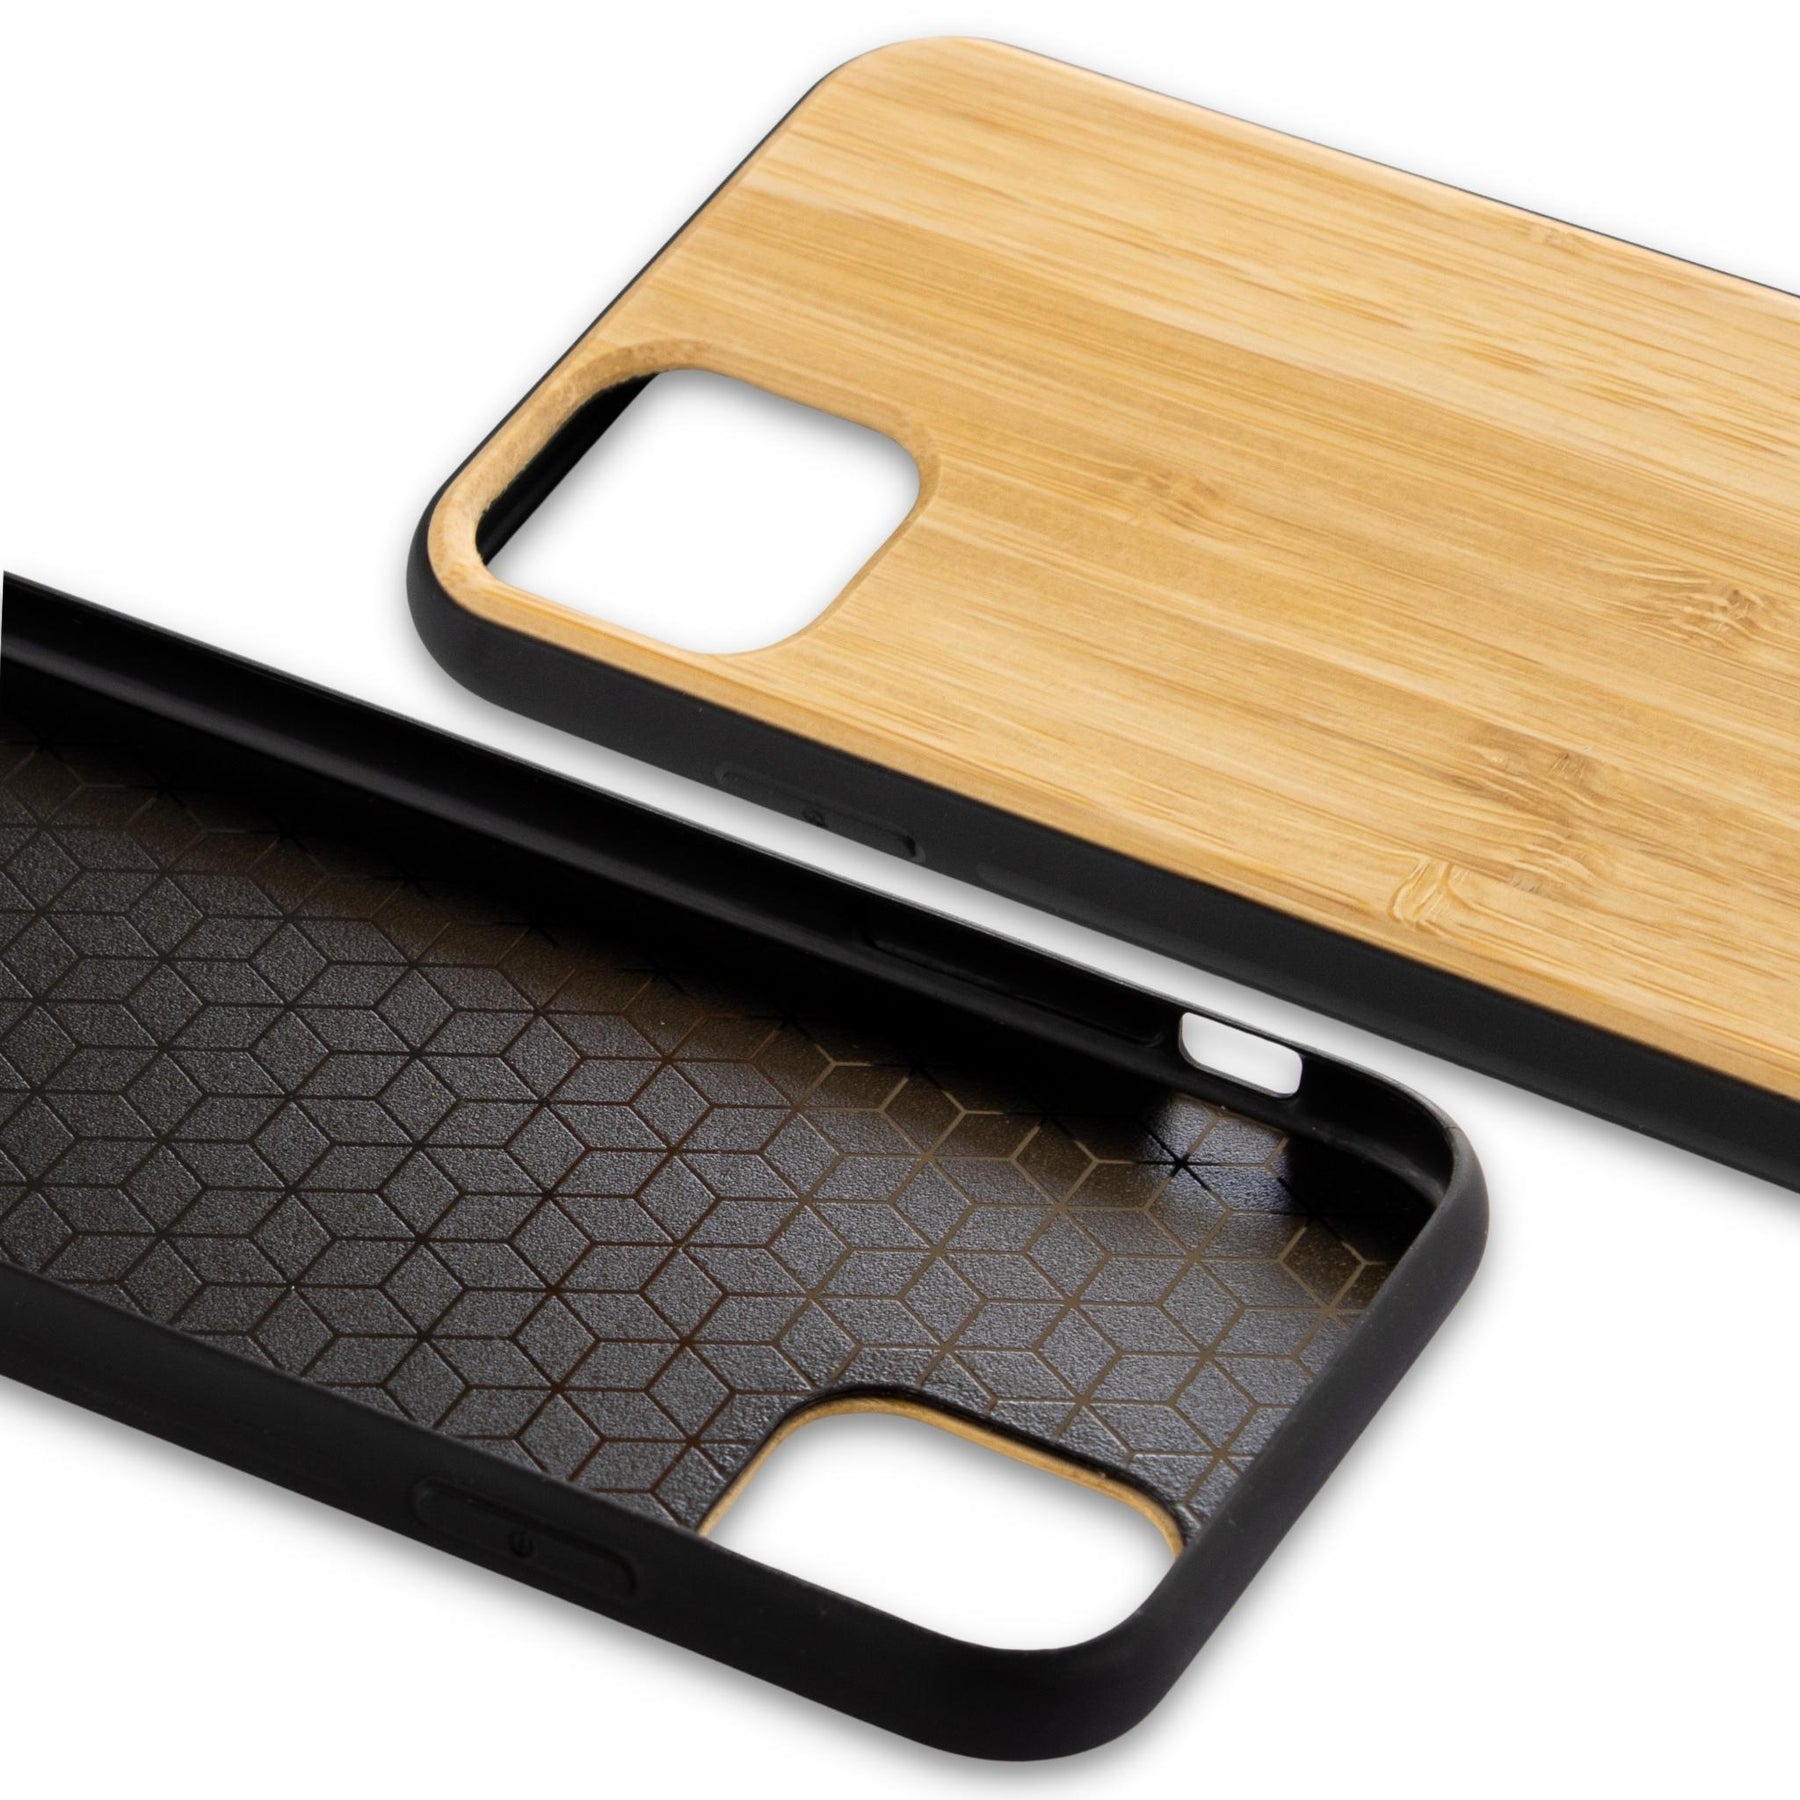 Wooden iPhone 11 case + Screen Protector